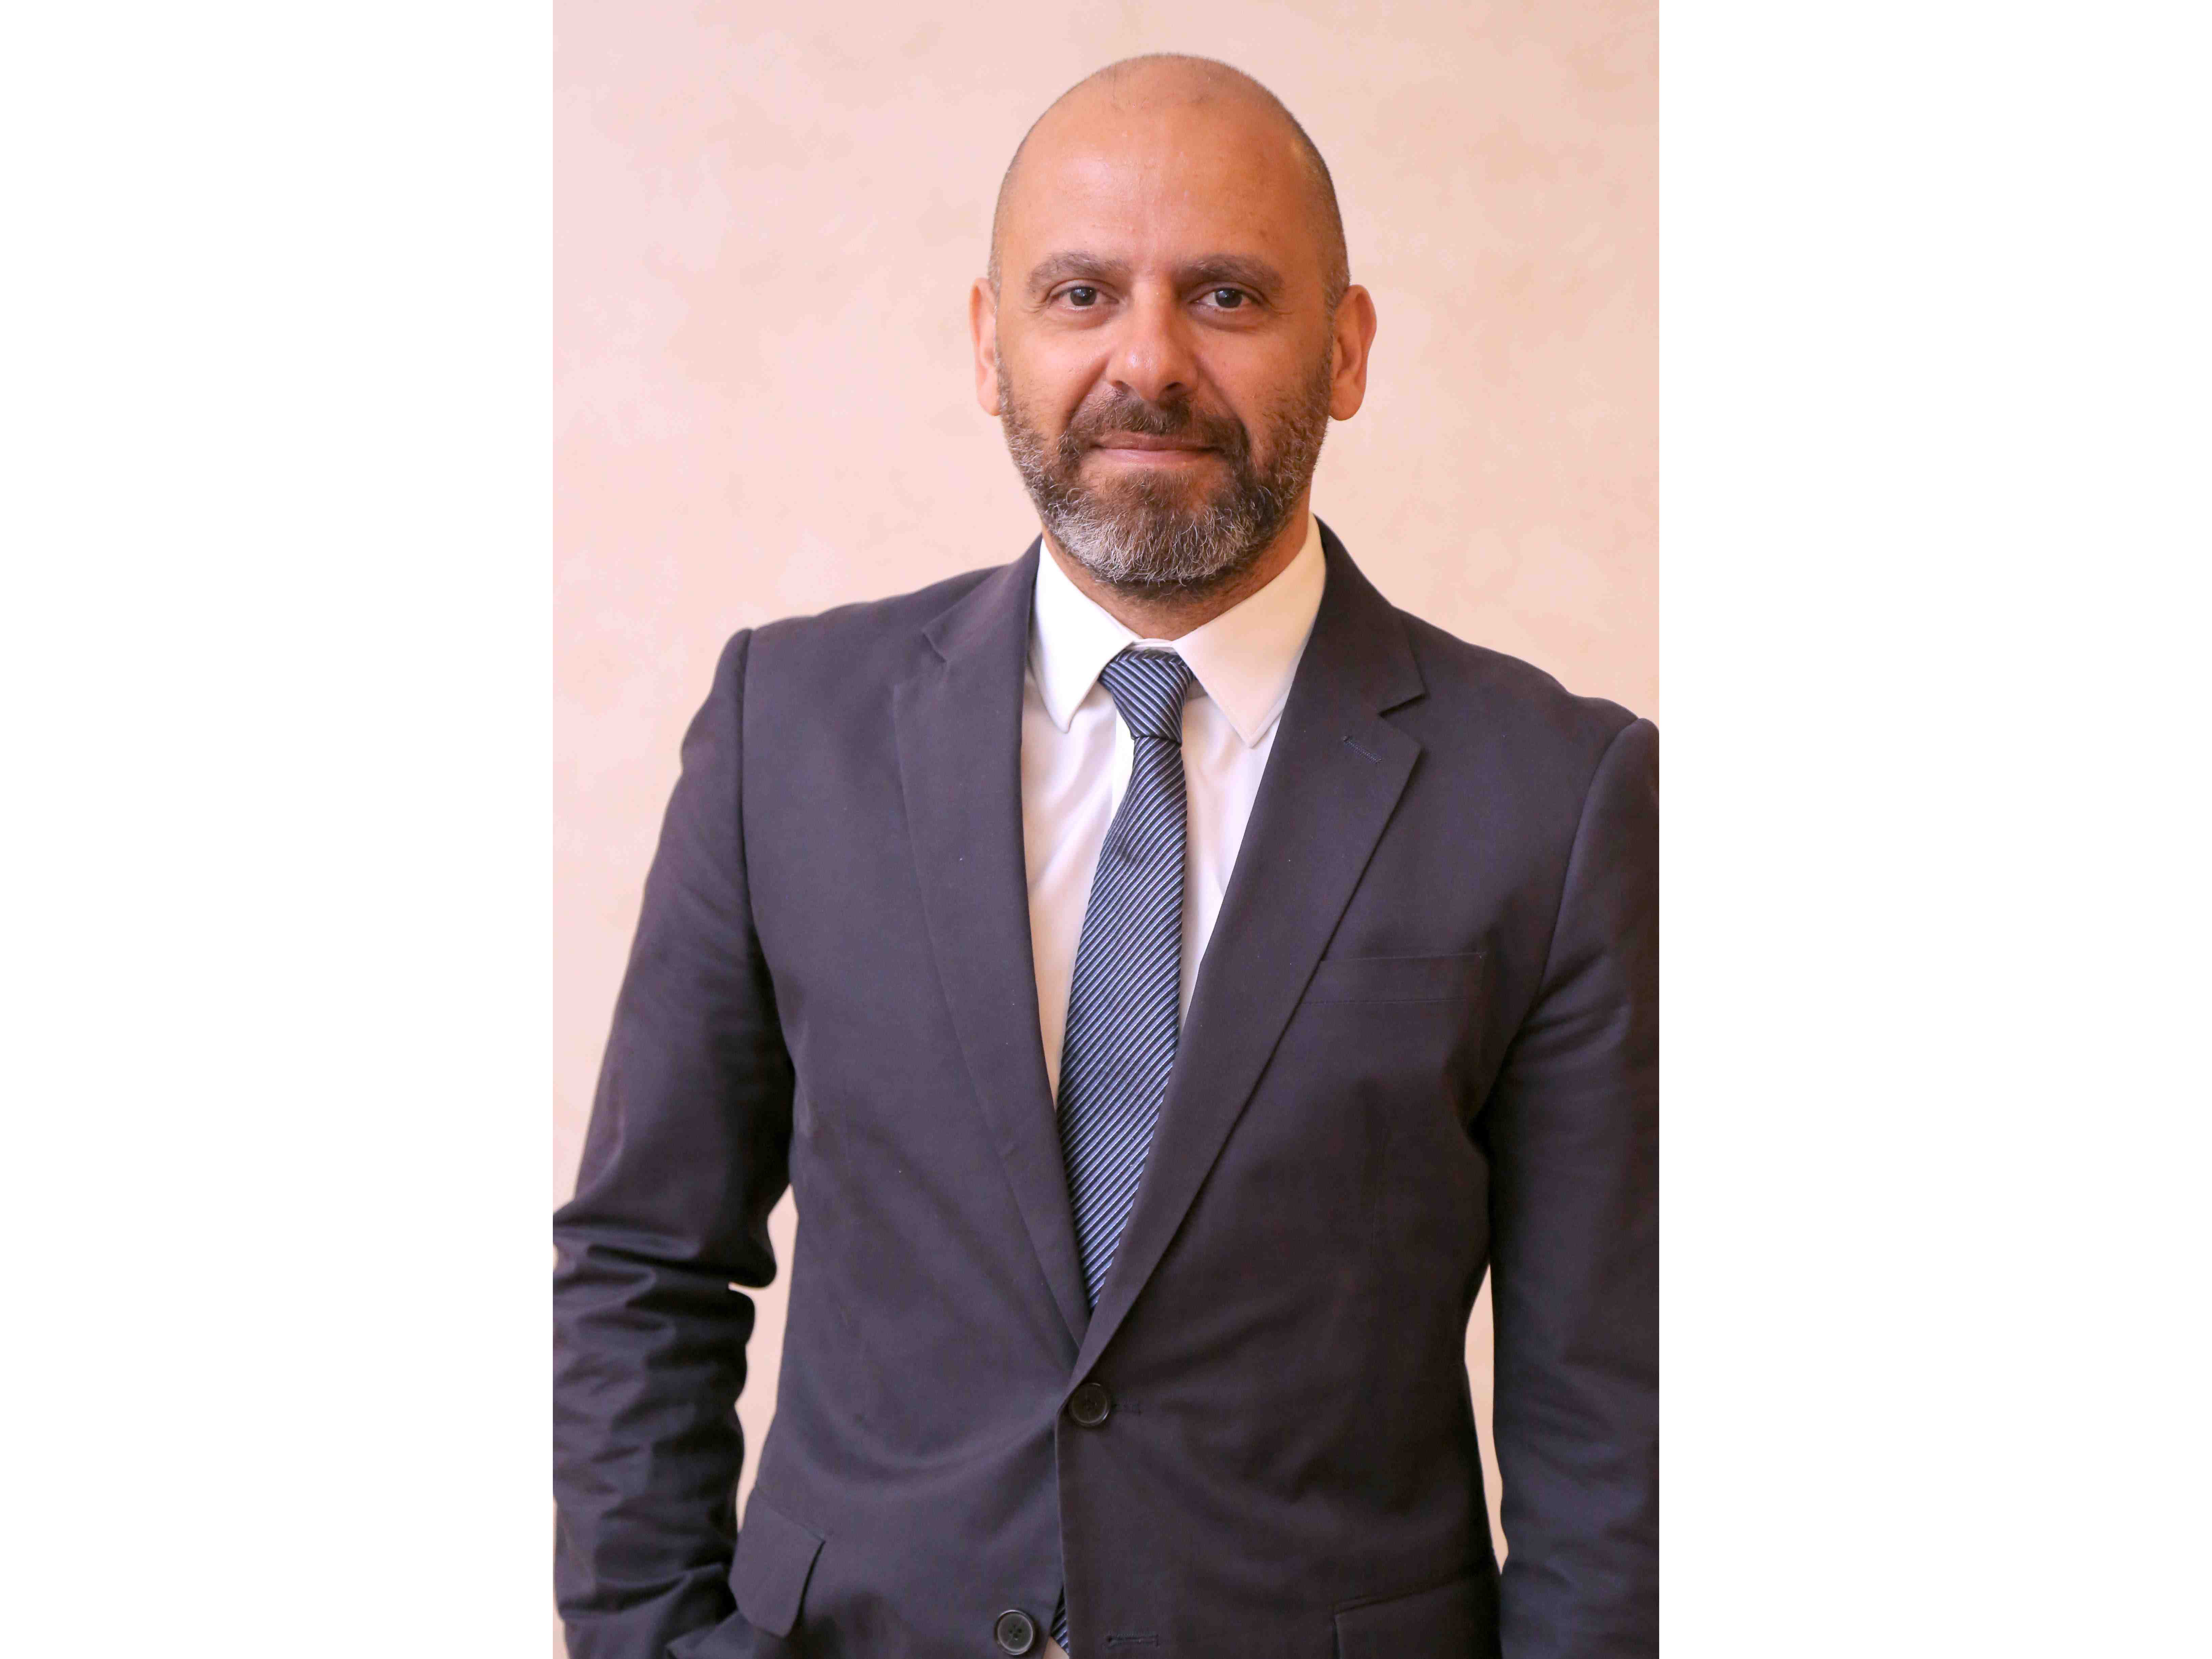 MENA advertising expenditure dissected and analysed by Elie Aoun, CEO of IPSOS Media MEA